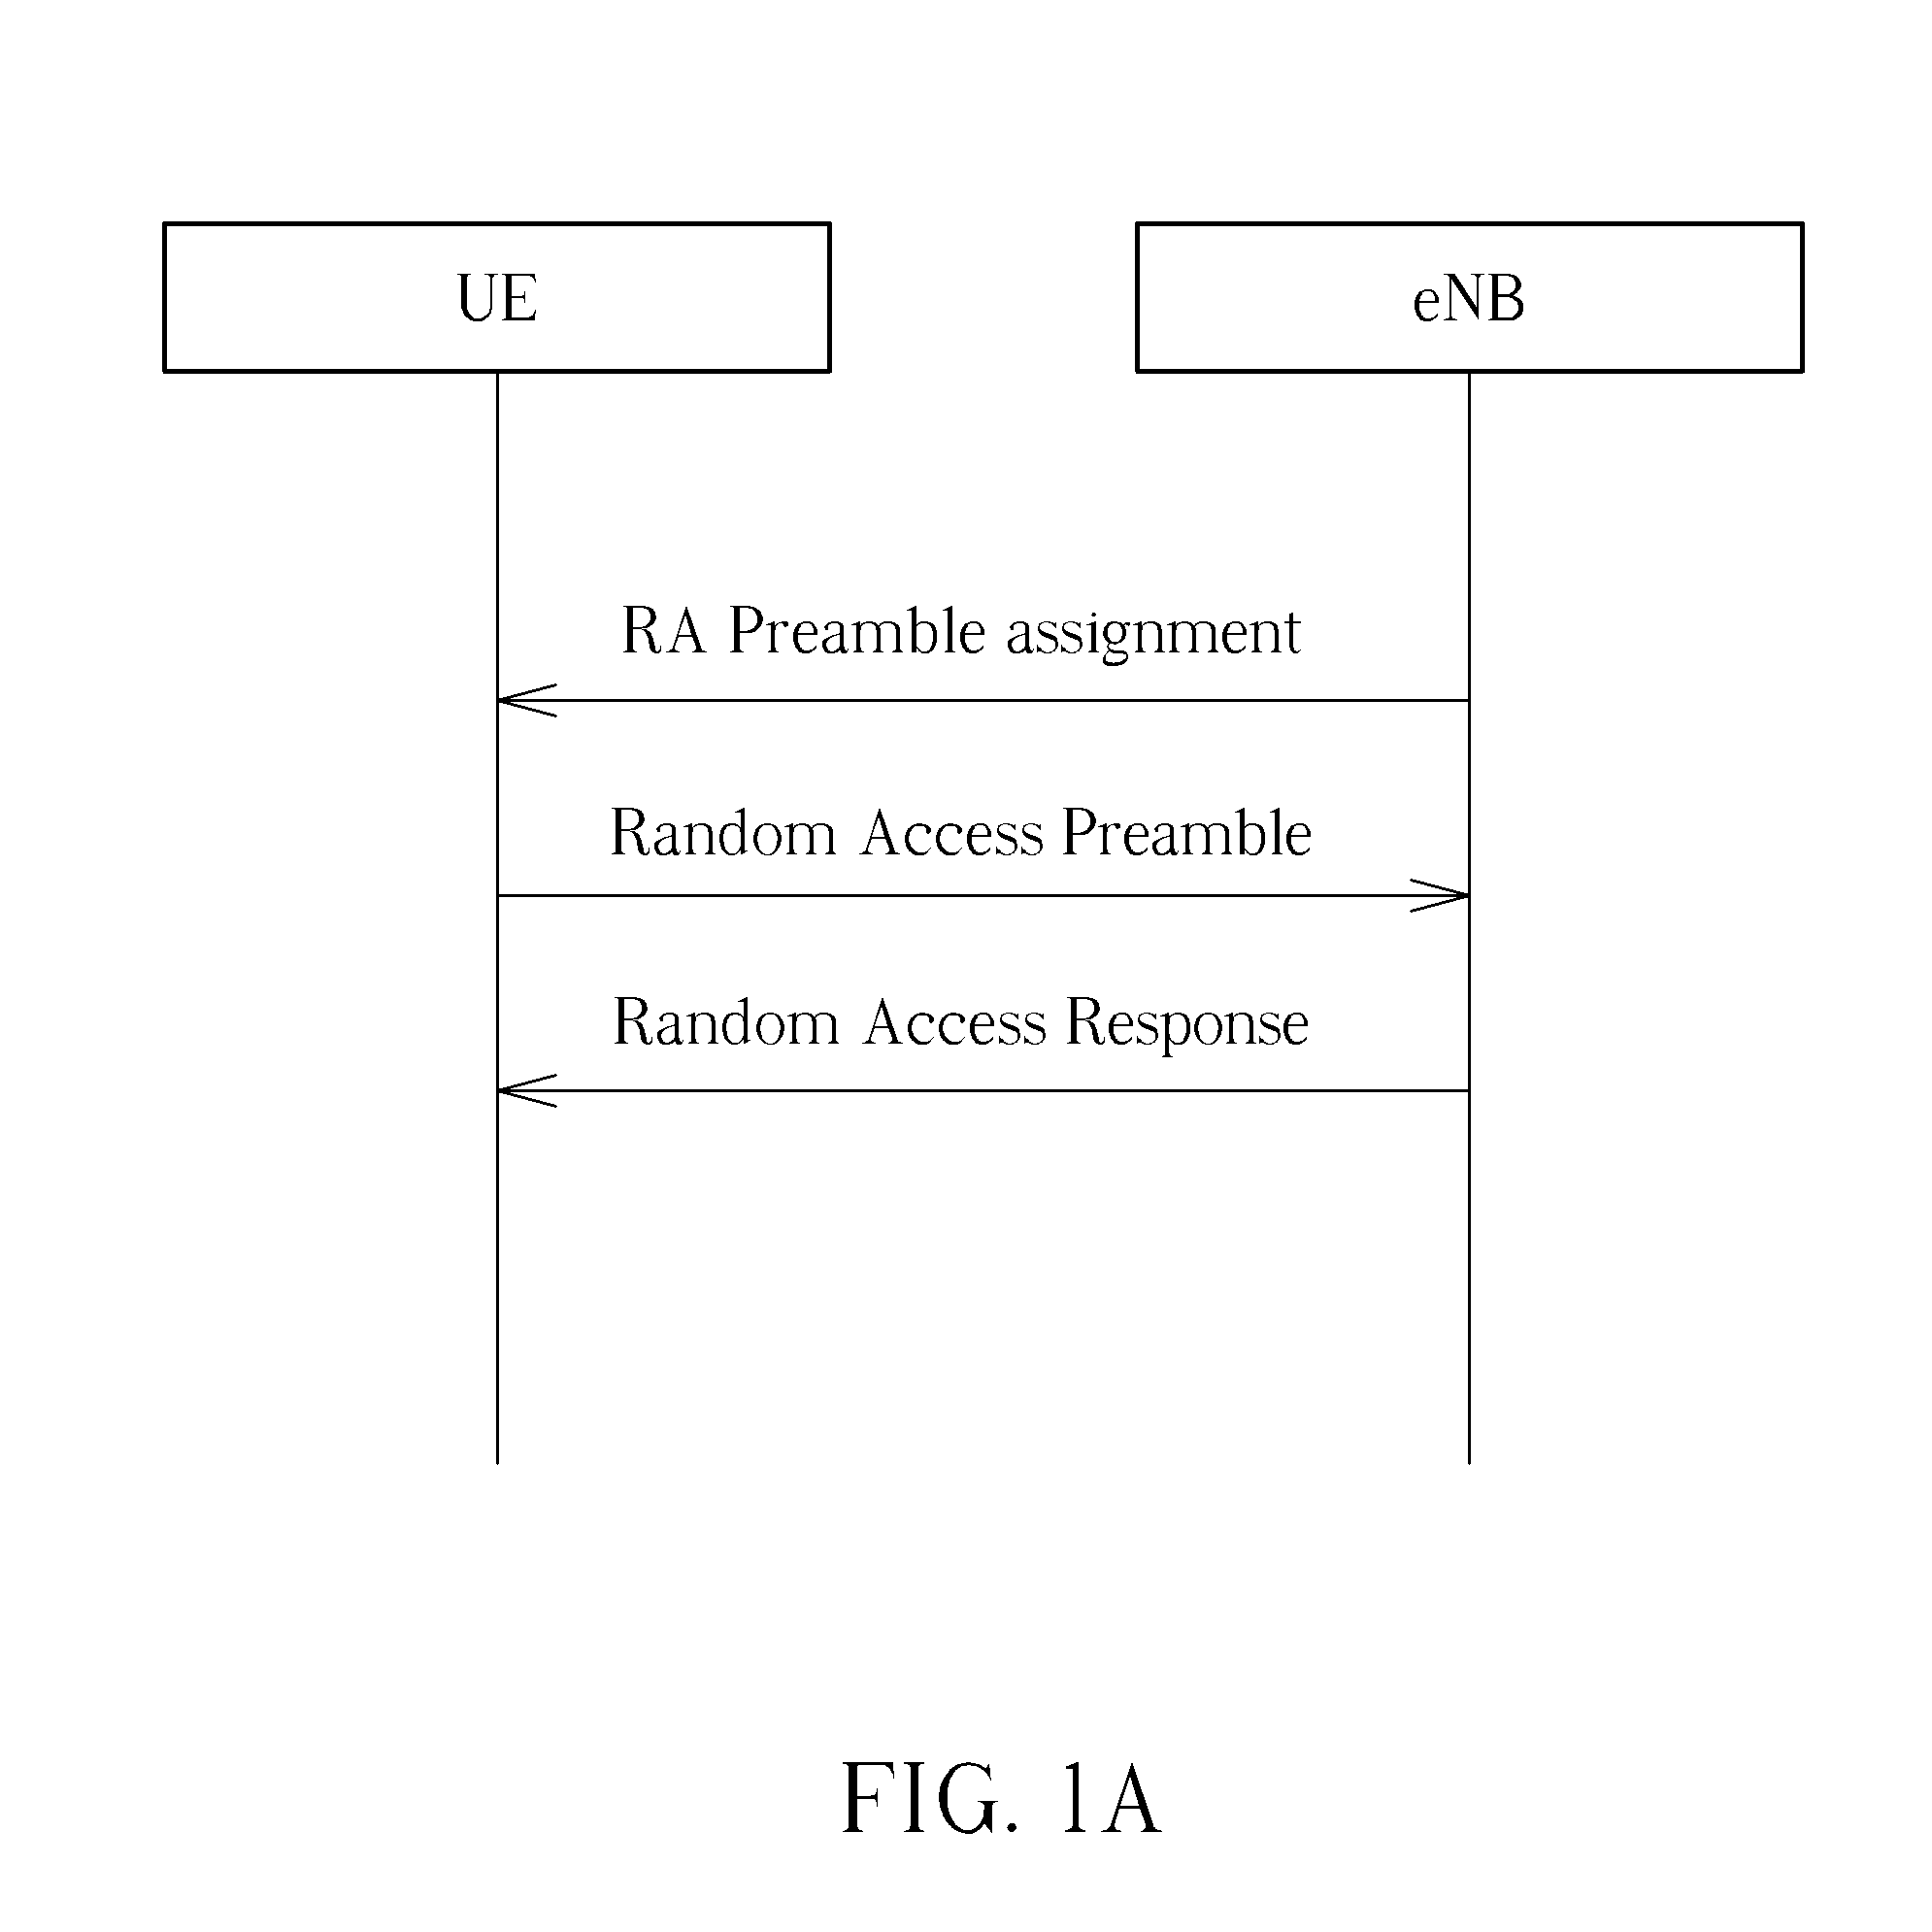 Method of Handling Random Access Procedure on Secondary Cell when Primary Cell Time Alignment Timer Expires